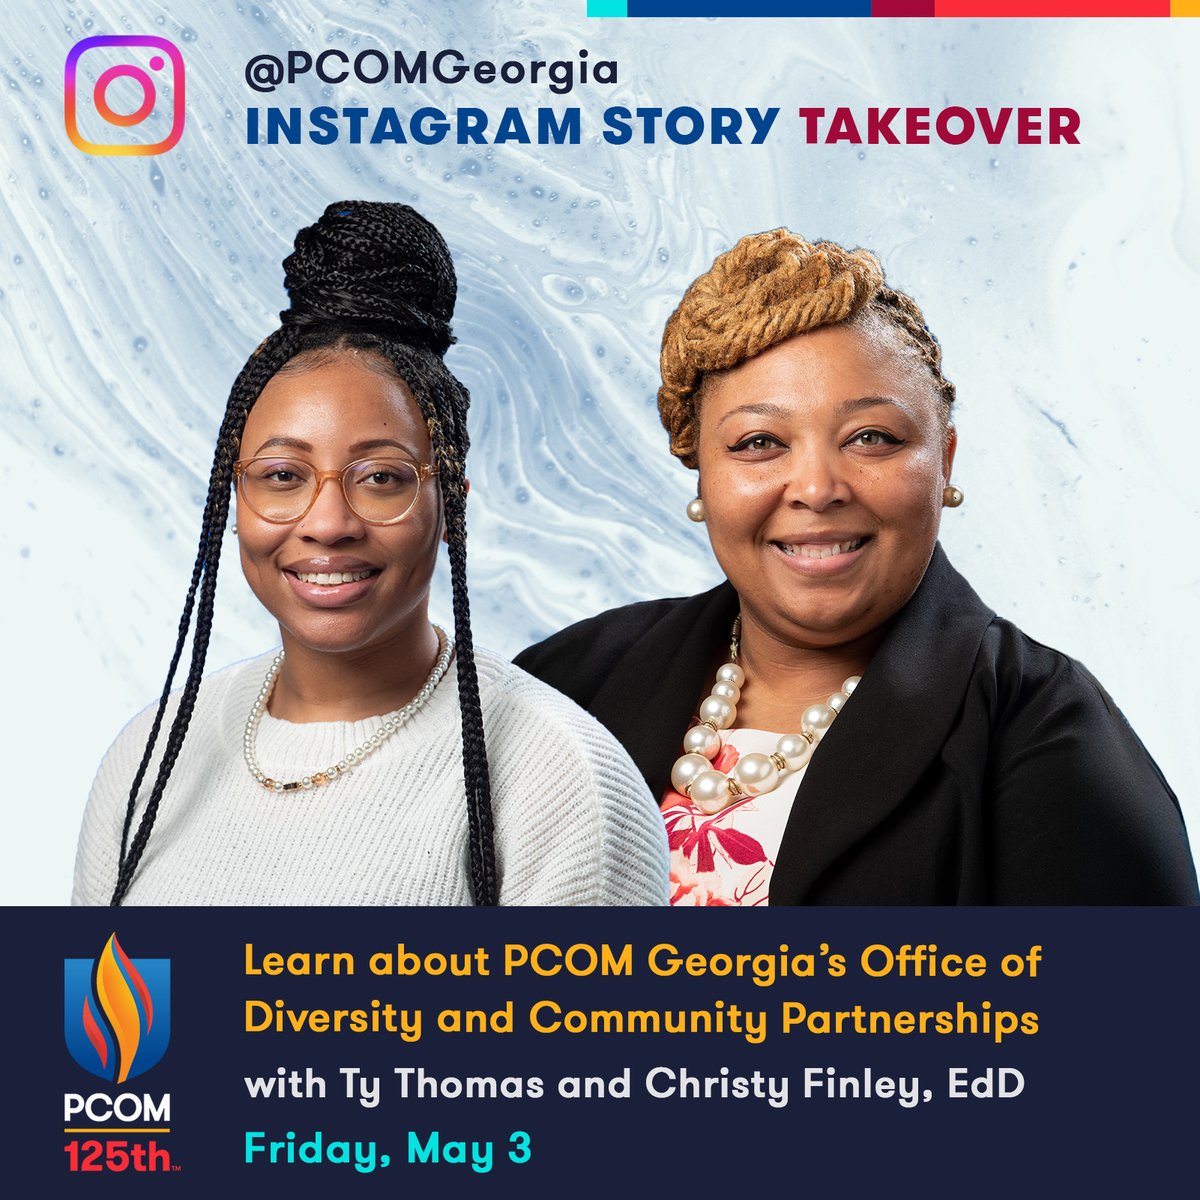 How much do you know about our Office of Diversity & Community Partnerships? 

TODAY, go behind the scenes with our team members to learn about the resources available to our campus community. Follow along as they take over @pcomgeorgia's Instagram Story: instagram.com/pcomgeorgia